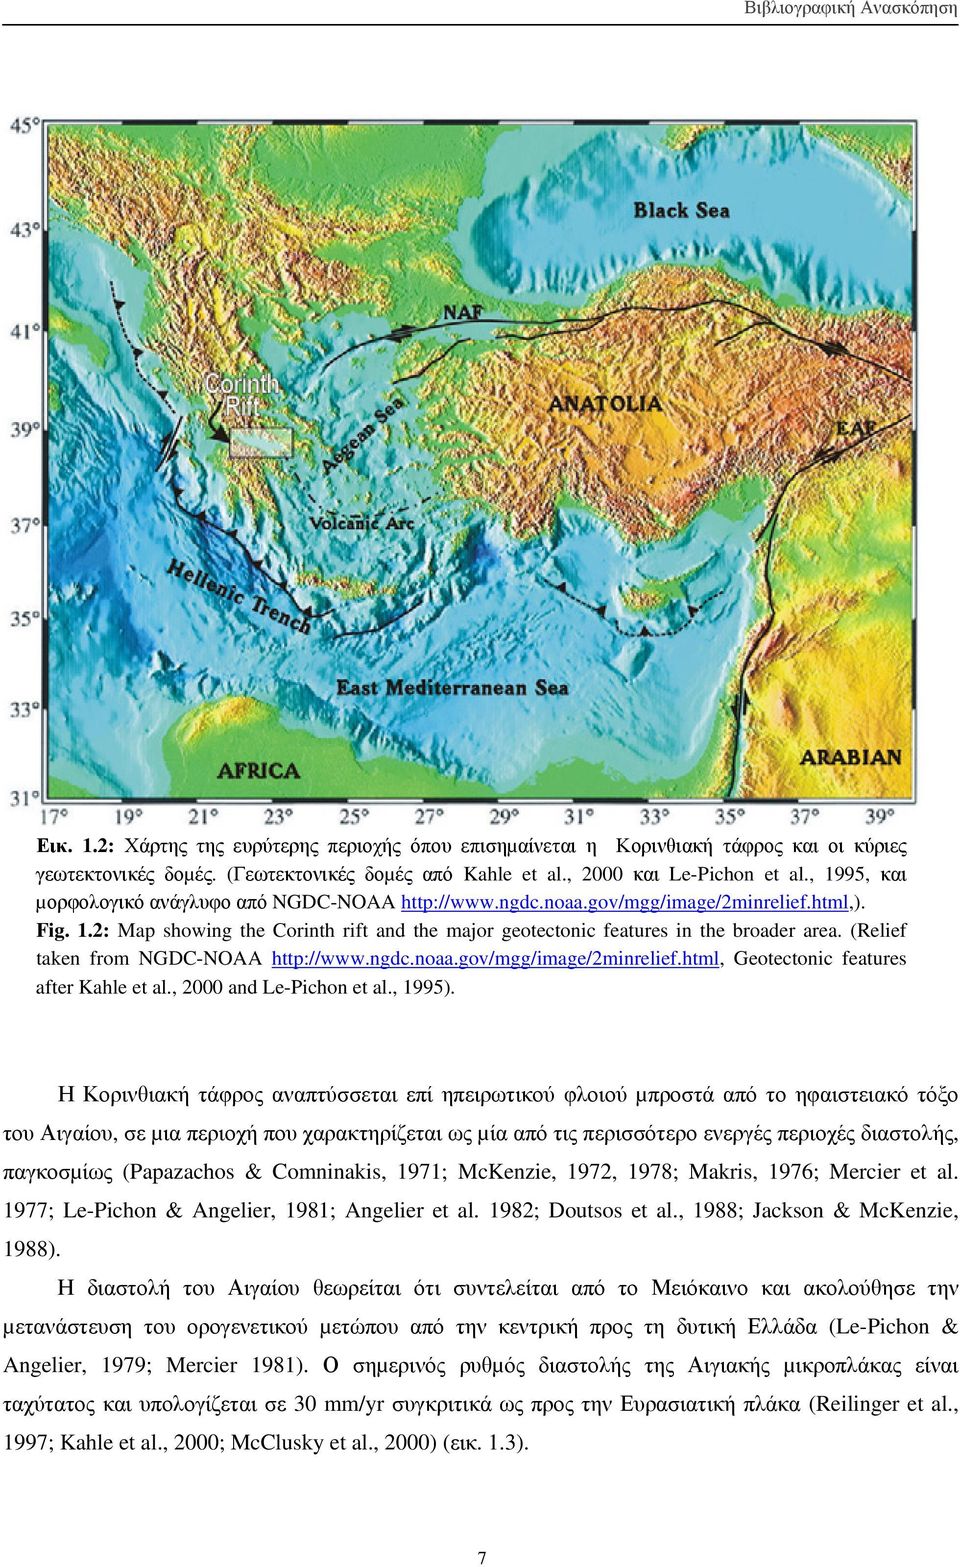 (Relief taken from NGDC-NOAA http://www.ngdc.noaa.gov/mgg/image/2minrelief.html, Geotectonic features after Kahle et al., 2000 and Le-Pichon et al., 1995).